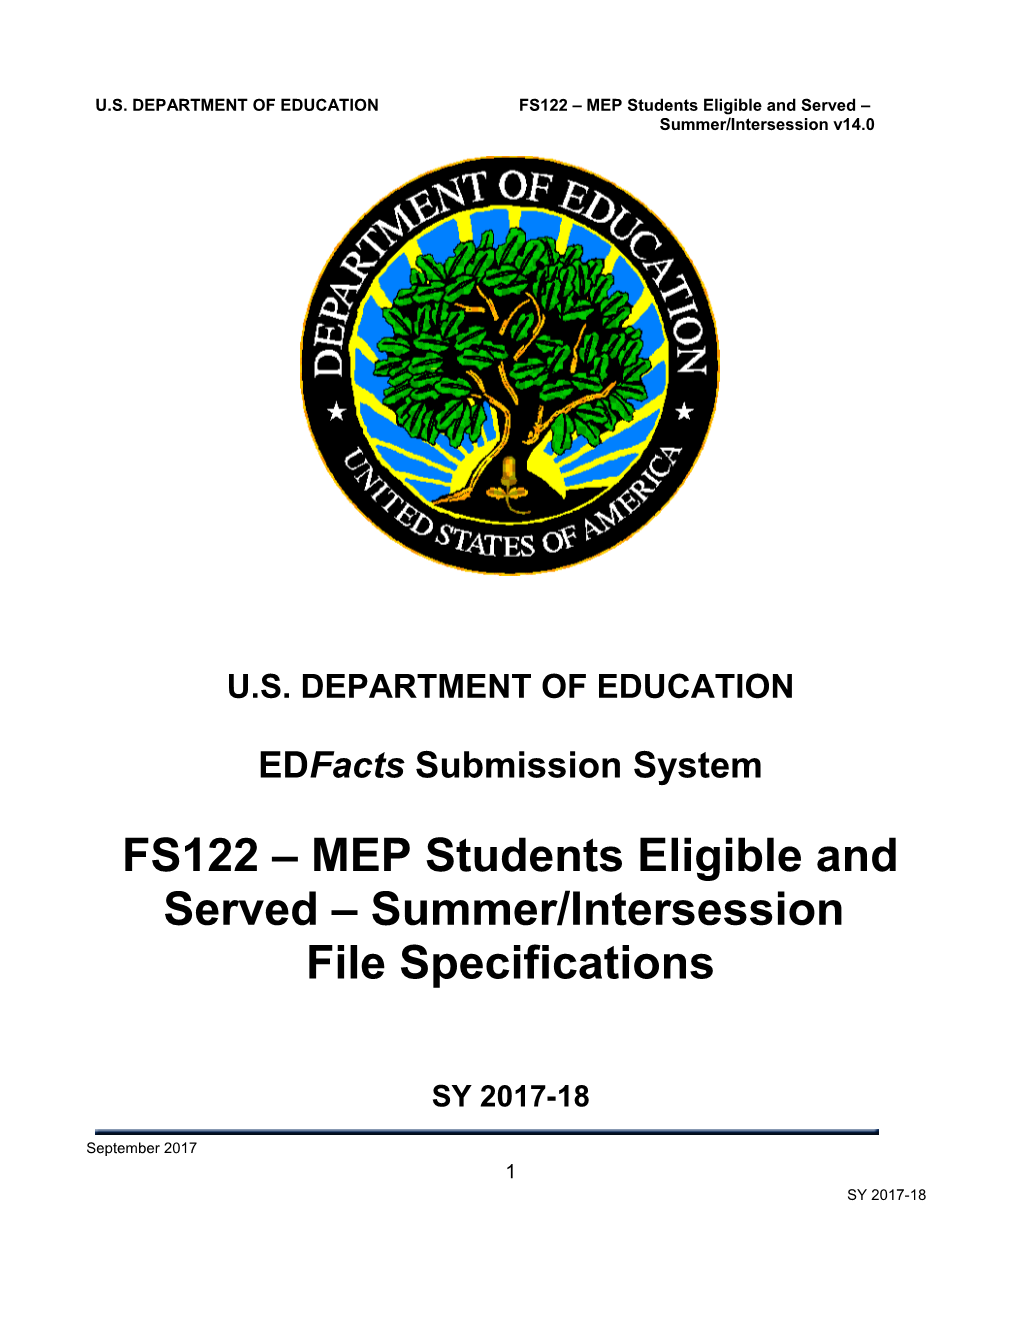 FS122 MEP Students Eligible and Served Summer/Intersession File Specifications (Msword)